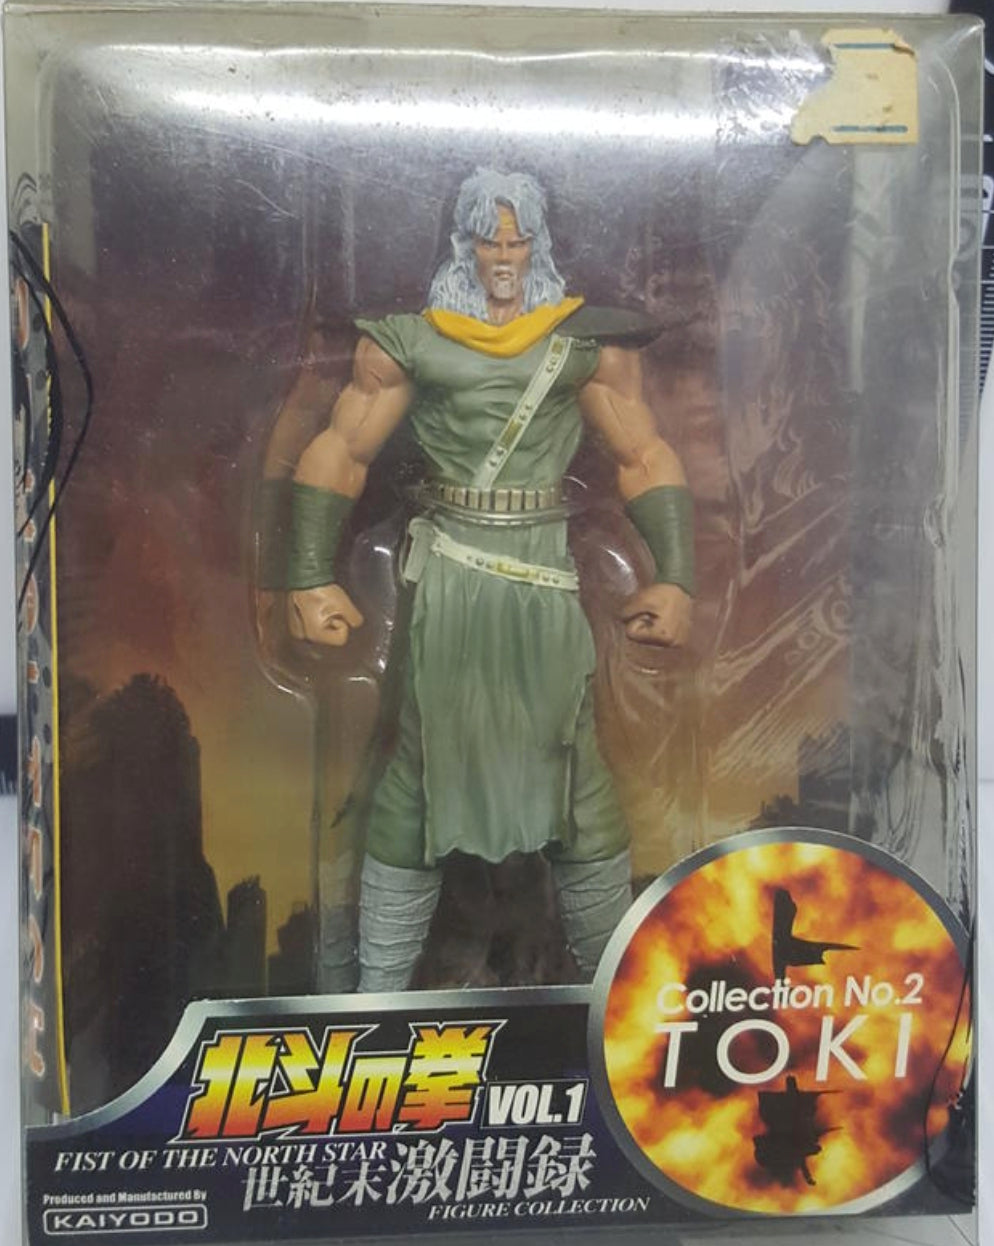 Kaiyodo Fist of The North Star Legend of Cassandra No 2 Toki Collection Figure